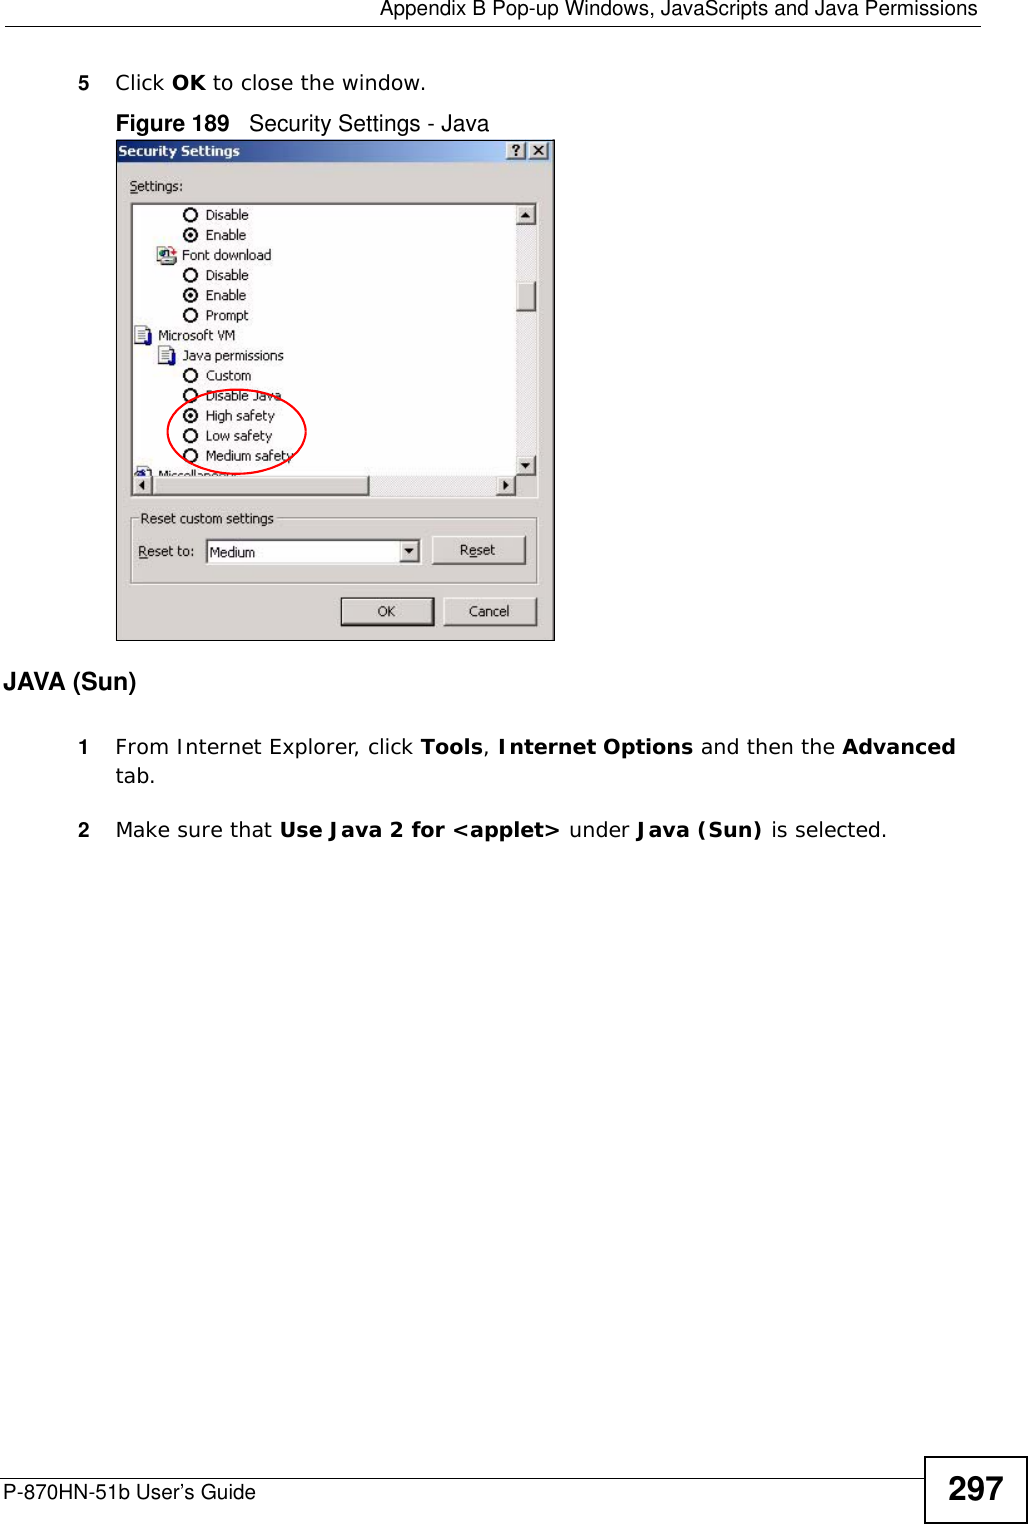  Appendix B Pop-up Windows, JavaScripts and Java PermissionsP-870HN-51b User’s Guide 2975Click OK to close the window.Figure 189   Security Settings - Java JAVA (Sun)1From Internet Explorer, click Tools, Internet Options and then the Advanced tab. 2Make sure that Use Java 2 for &lt;applet&gt; under Java (Sun) is selected.